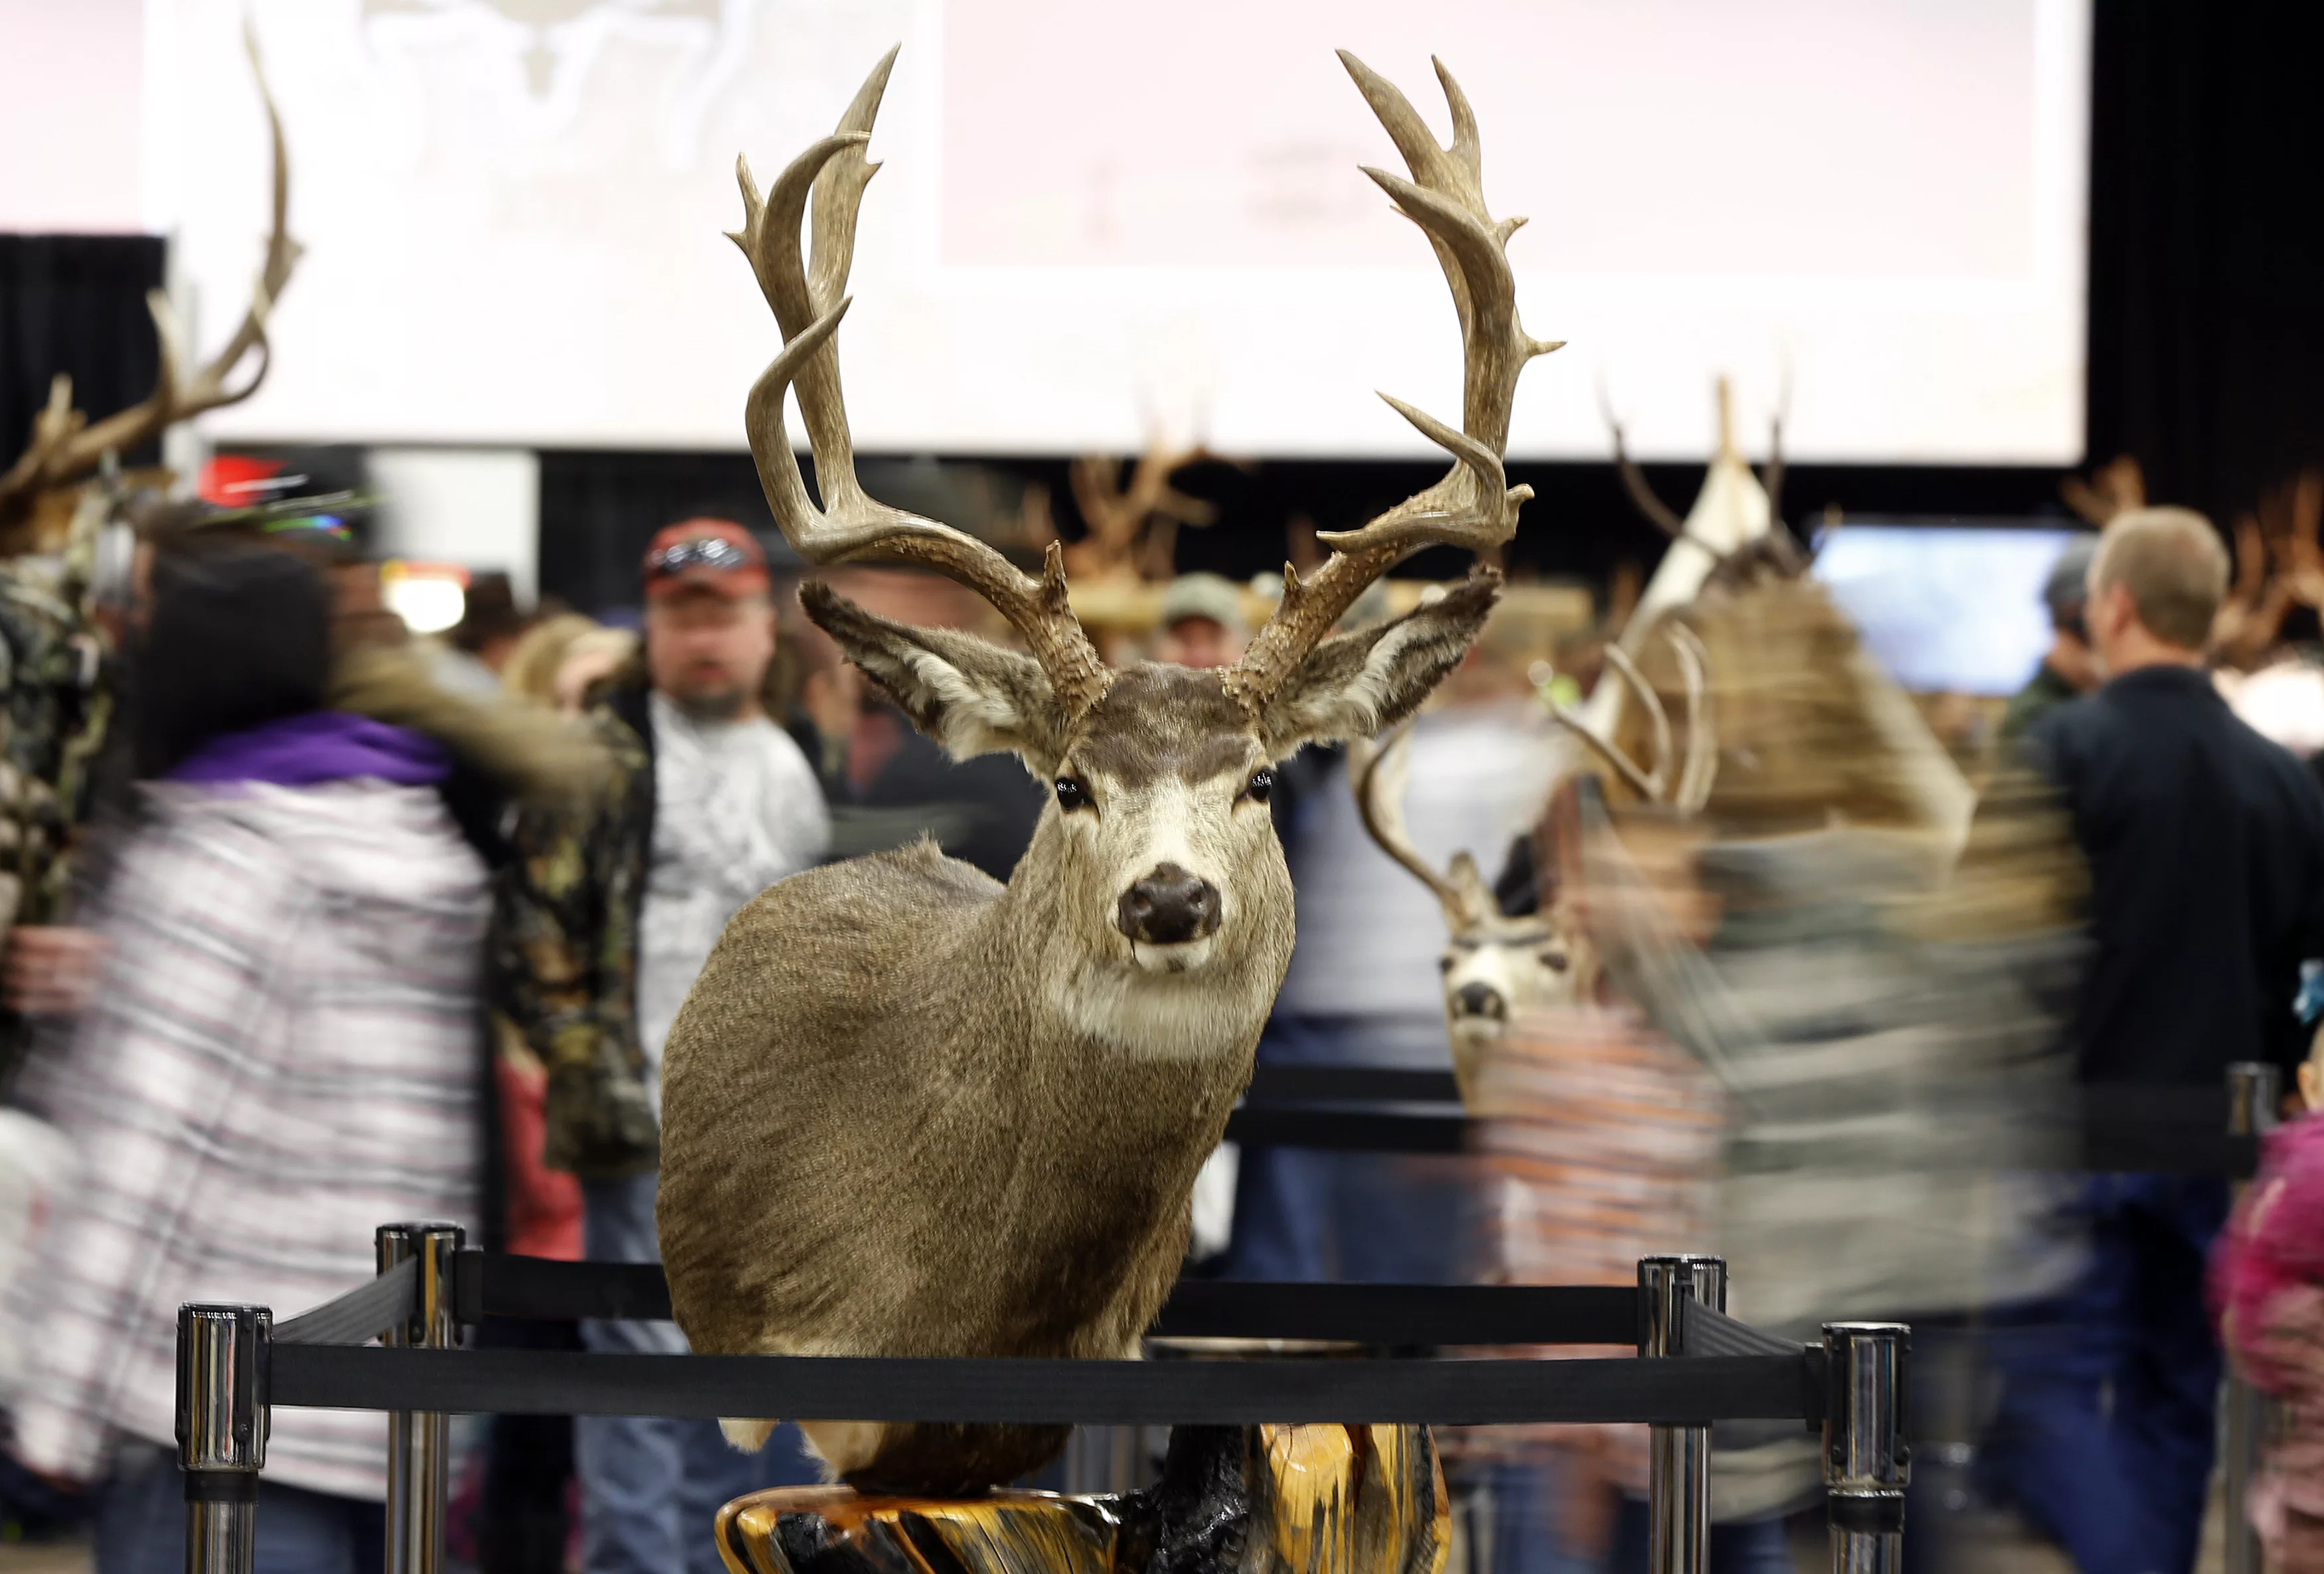 gun-and-hunting-enthusiasts-walk-past-at-mounted-deer-head-at-the-western-hunting-and-conservation-expo-in-salt-lake-city